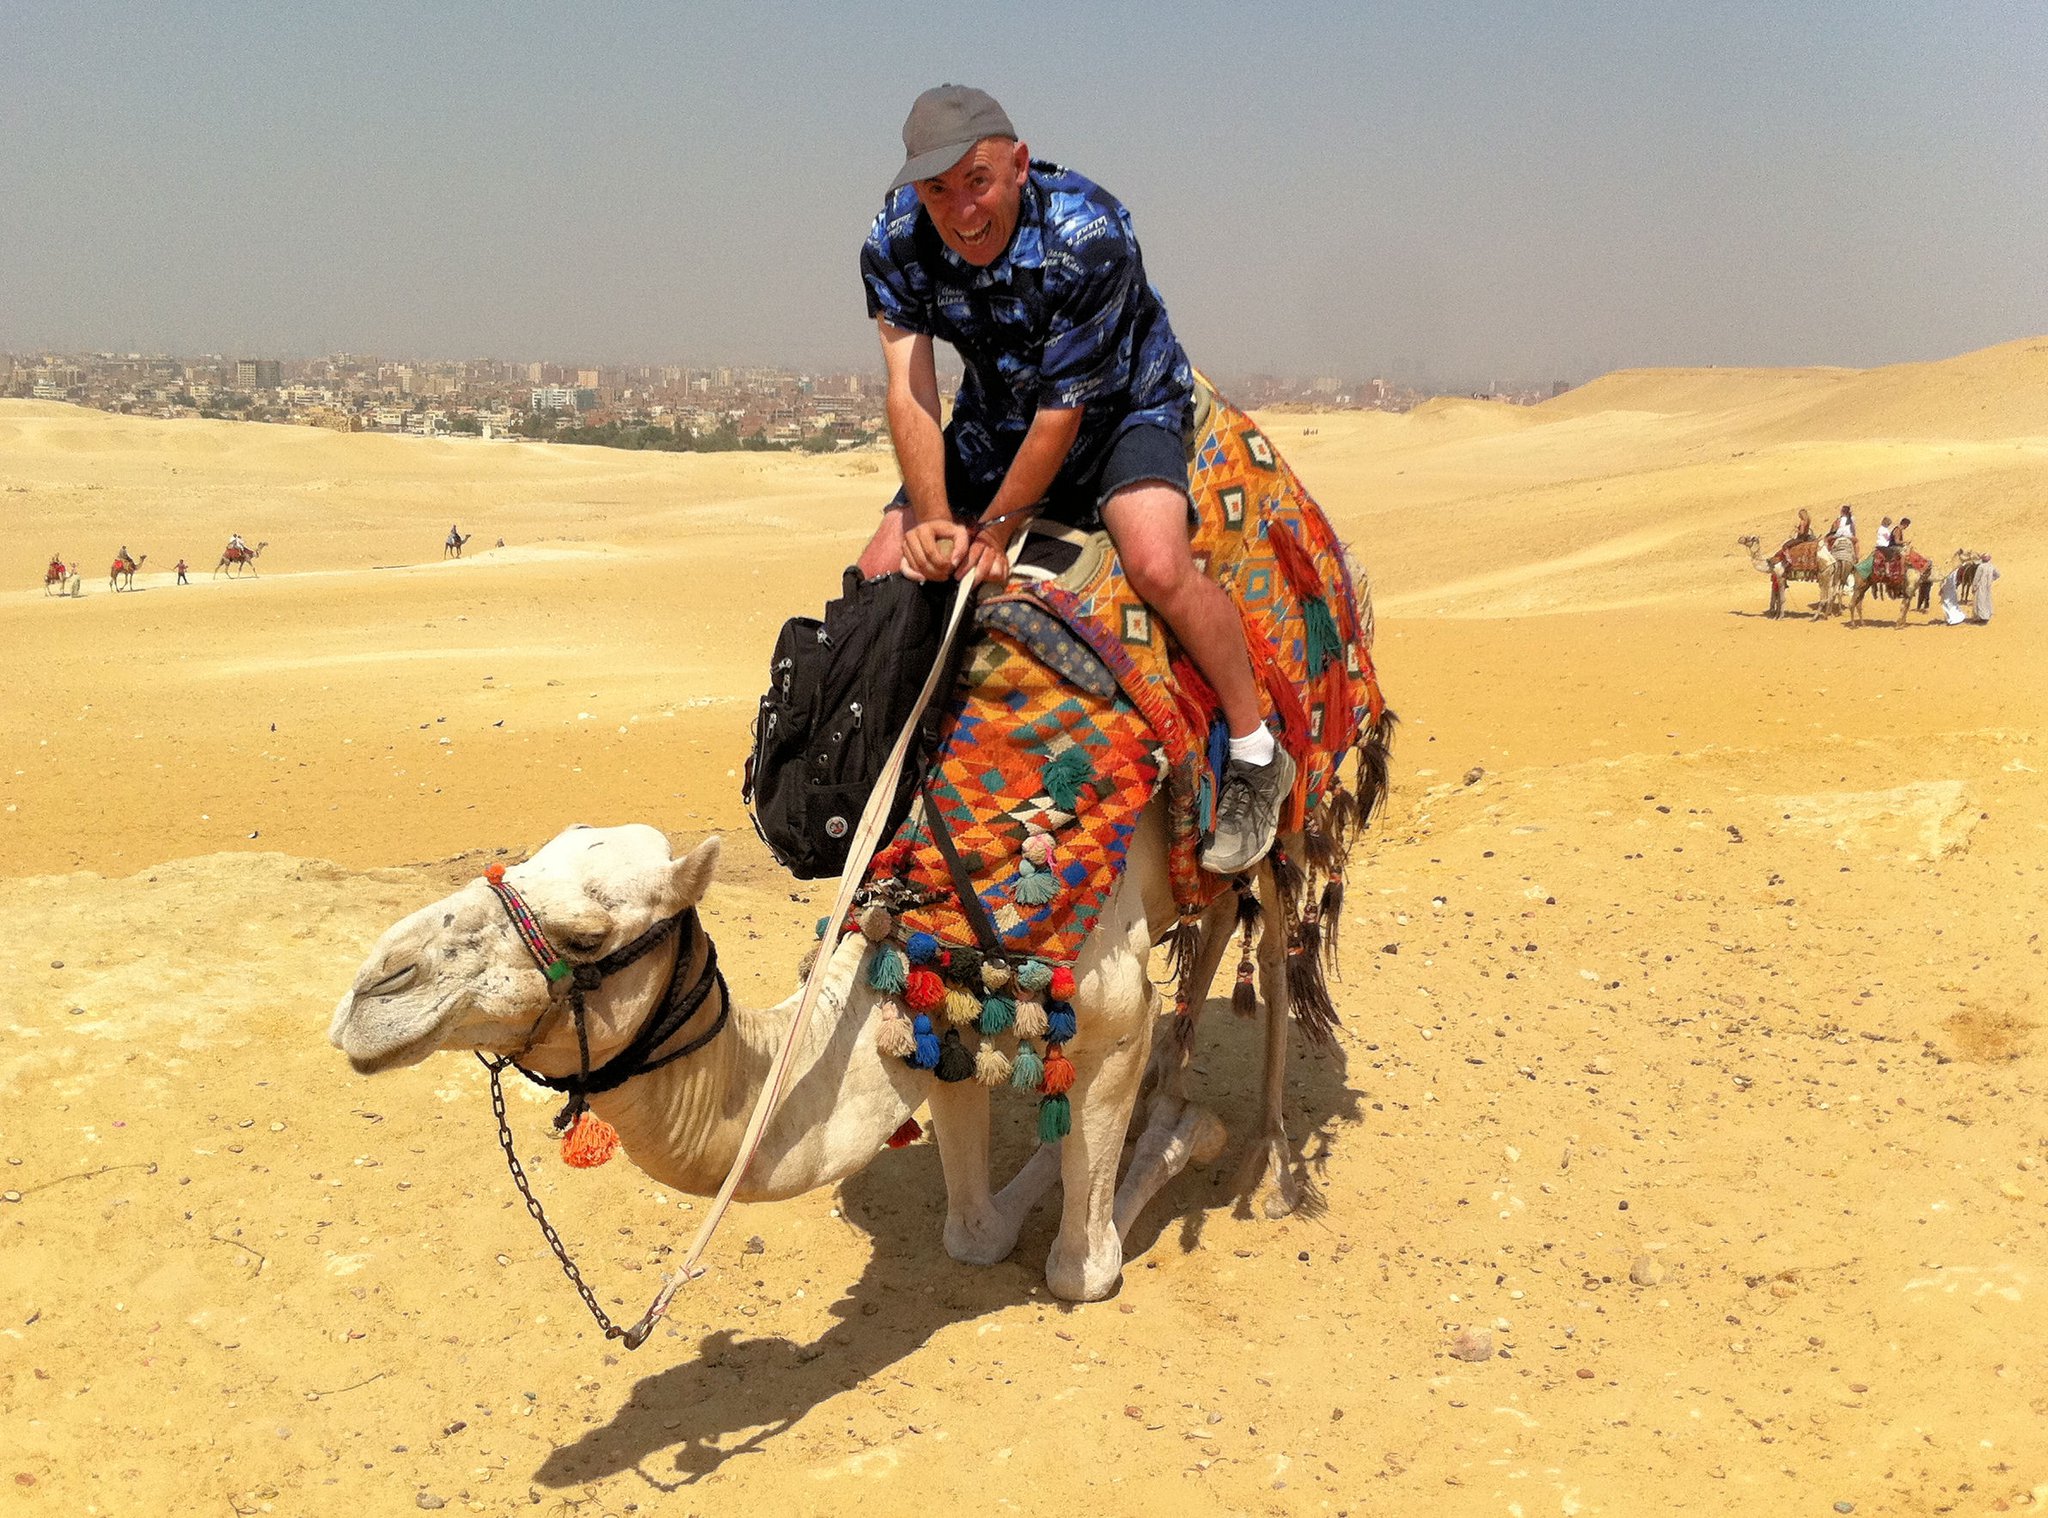 Dismounting at the Giza Pyramids. Getting off is the hardest part!